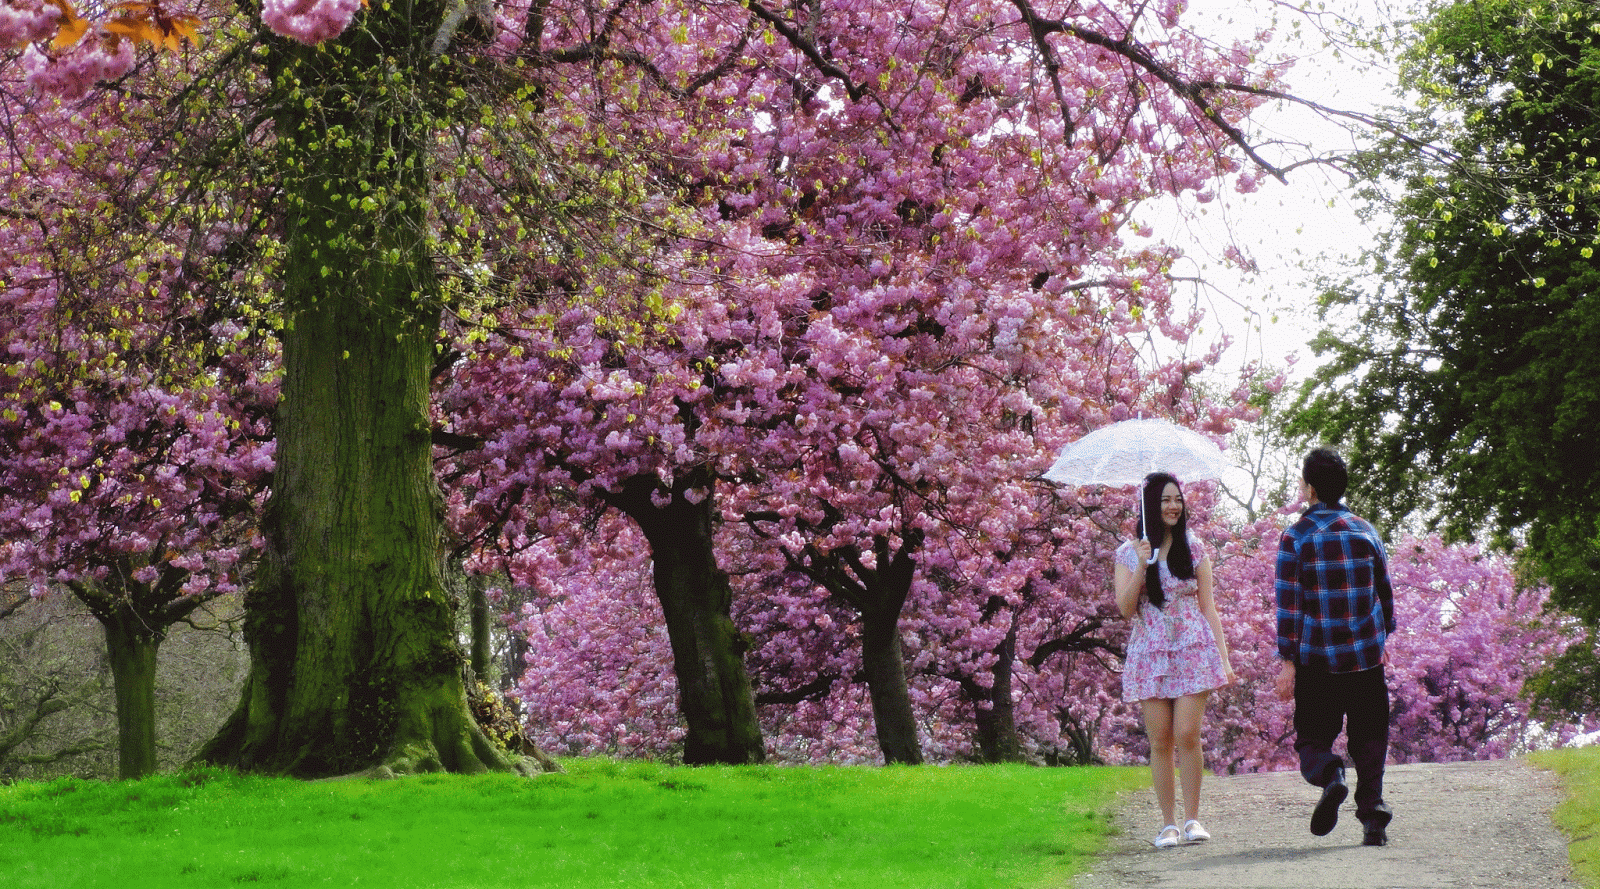 travel the world is a dream cherry blossoms medium